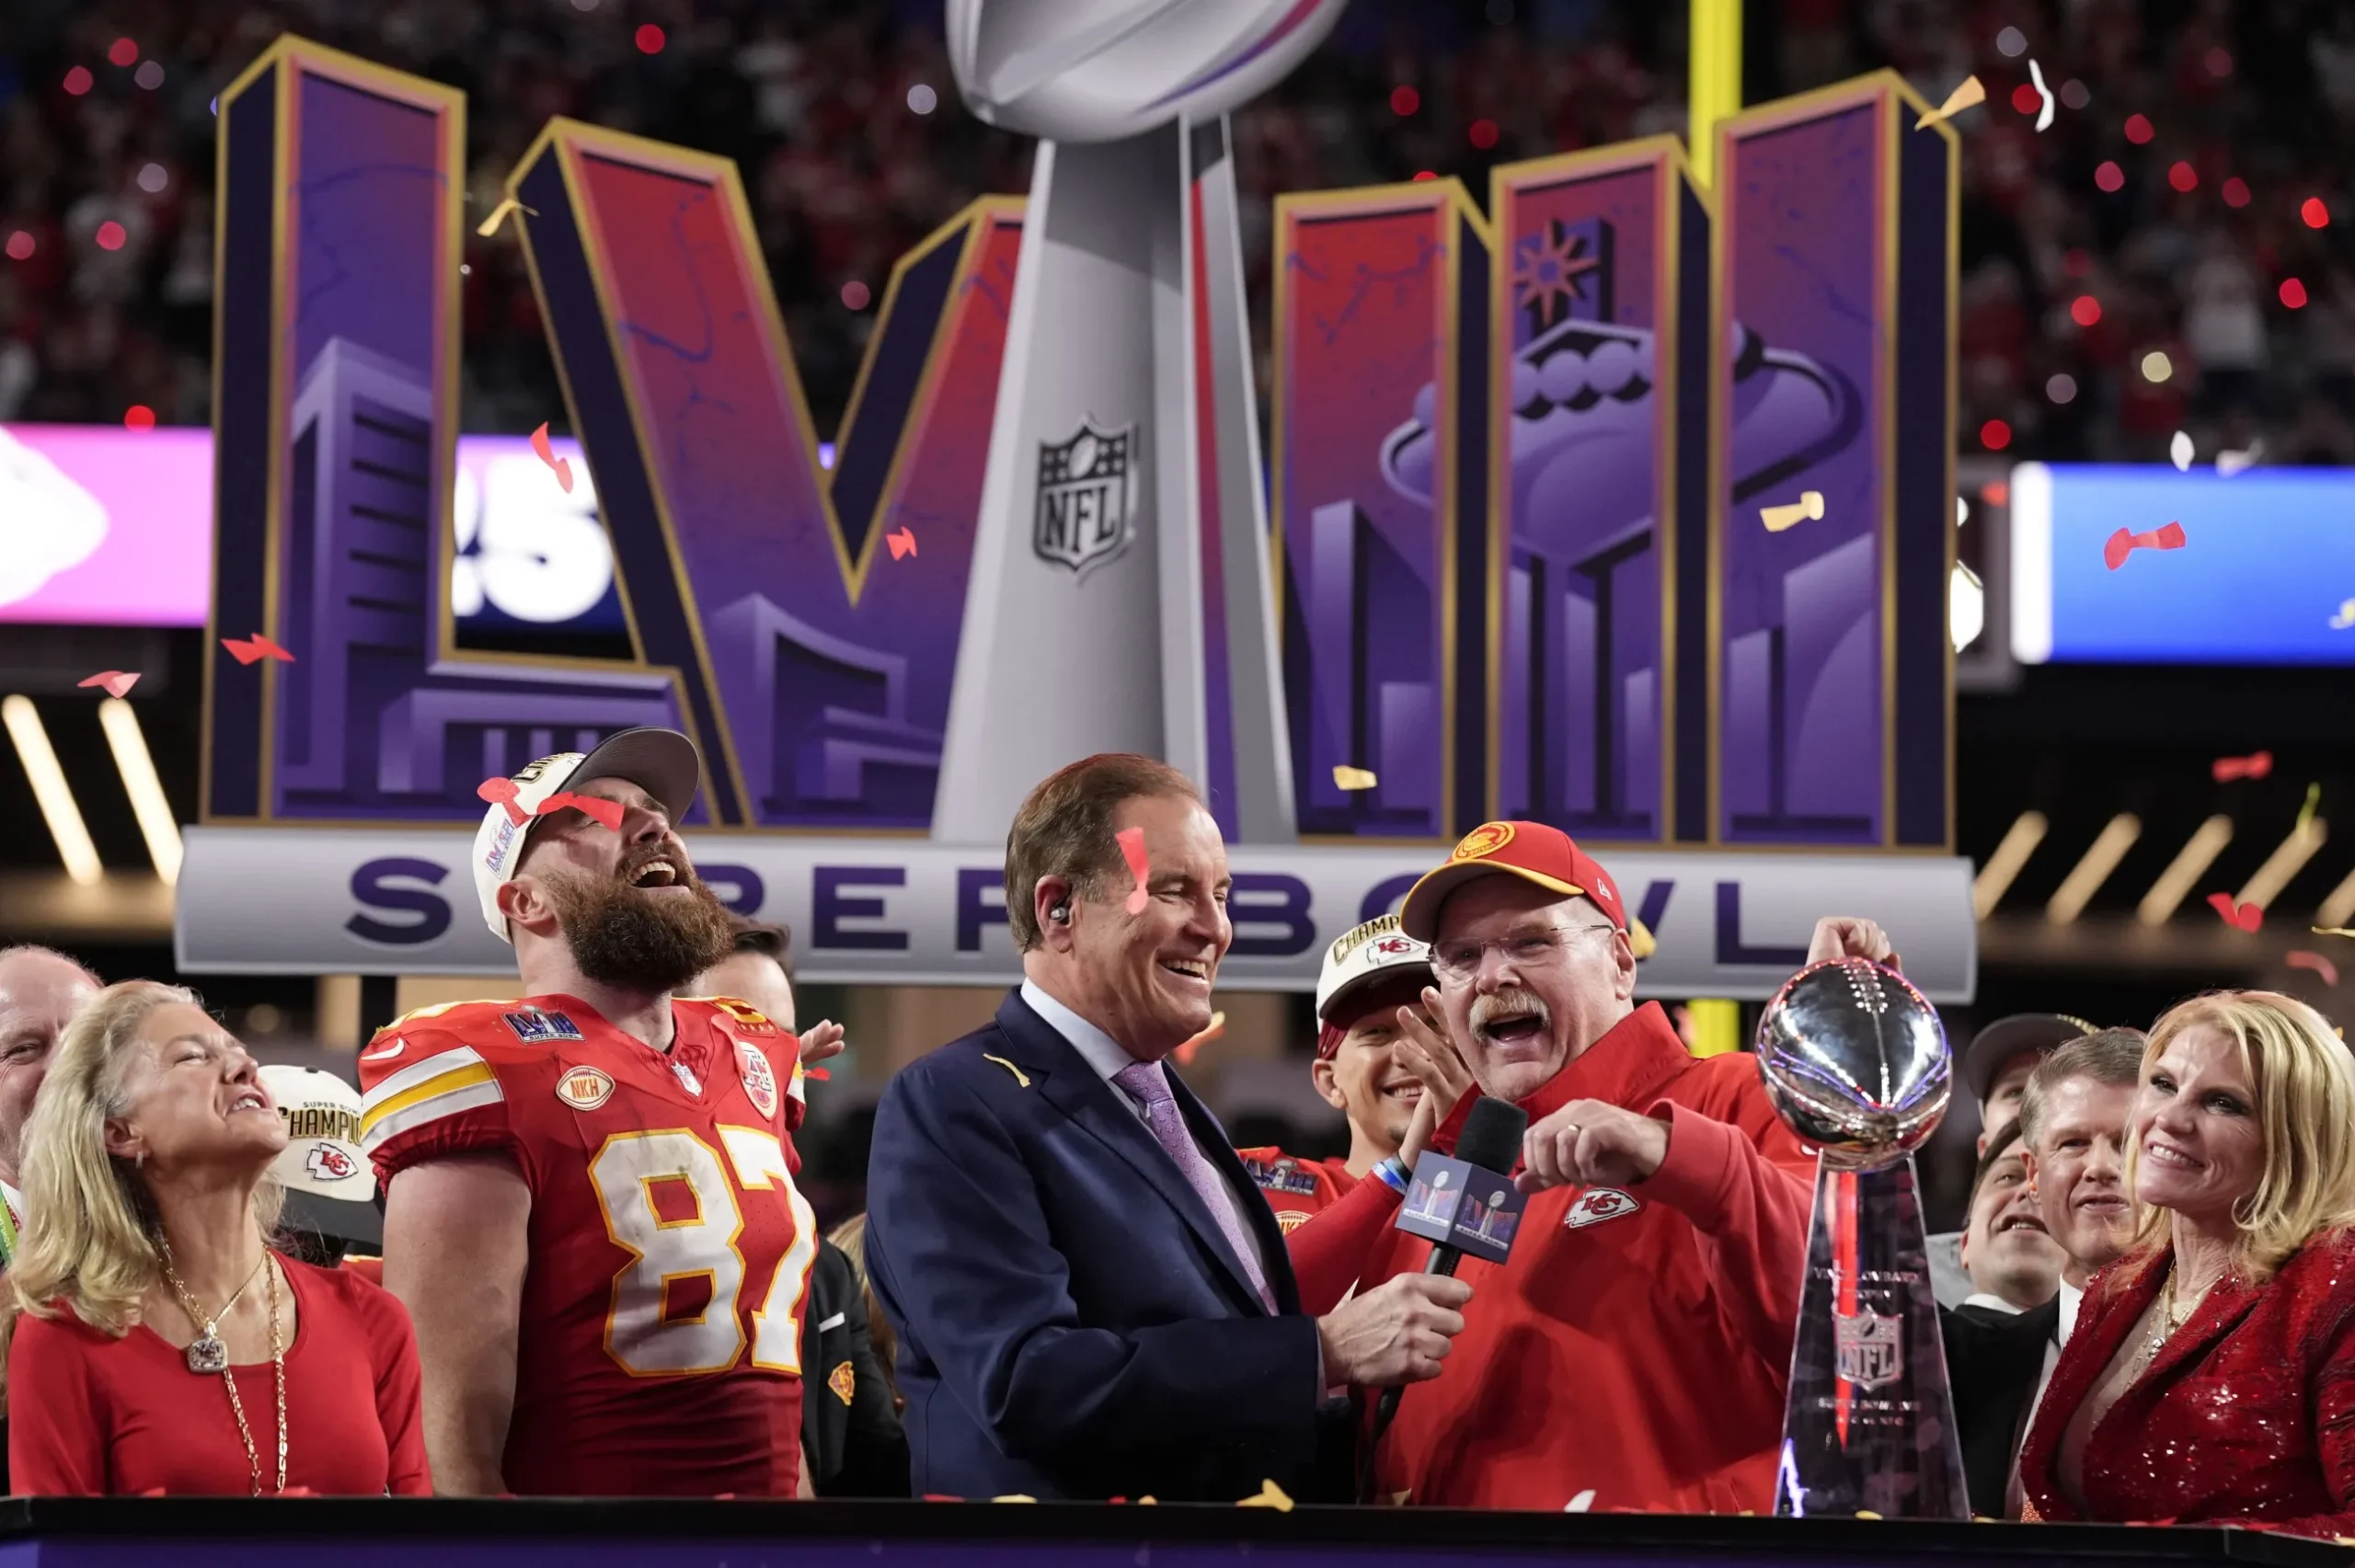 The Kansas City Chiefs celebrate after their victory in Super Bowl LVIII. Photo by John Locher, Associated Press